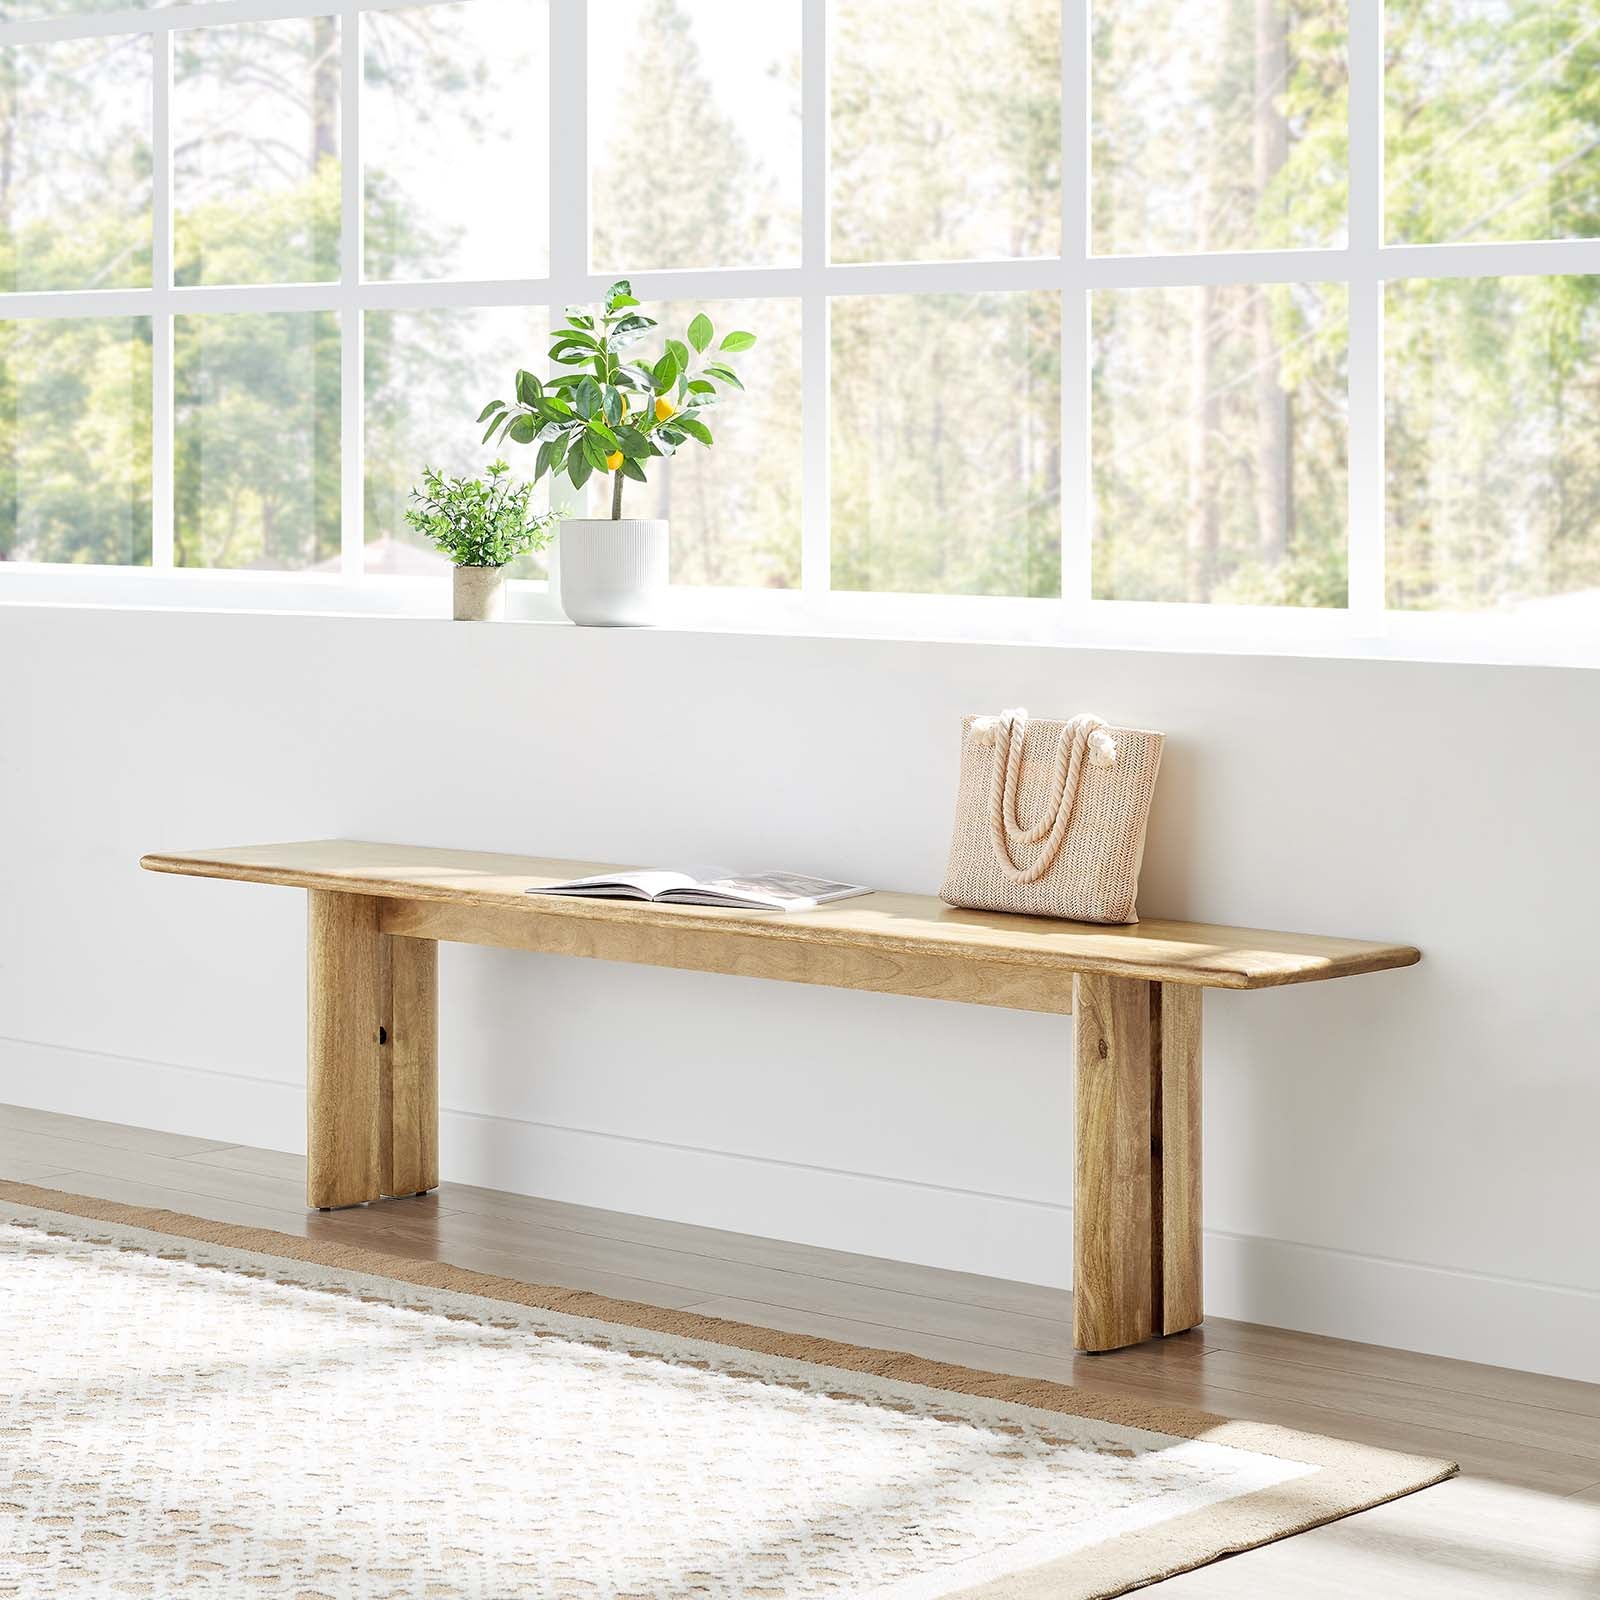 Amistad 72" Wood Bench - East Shore Modern Home Furnishings